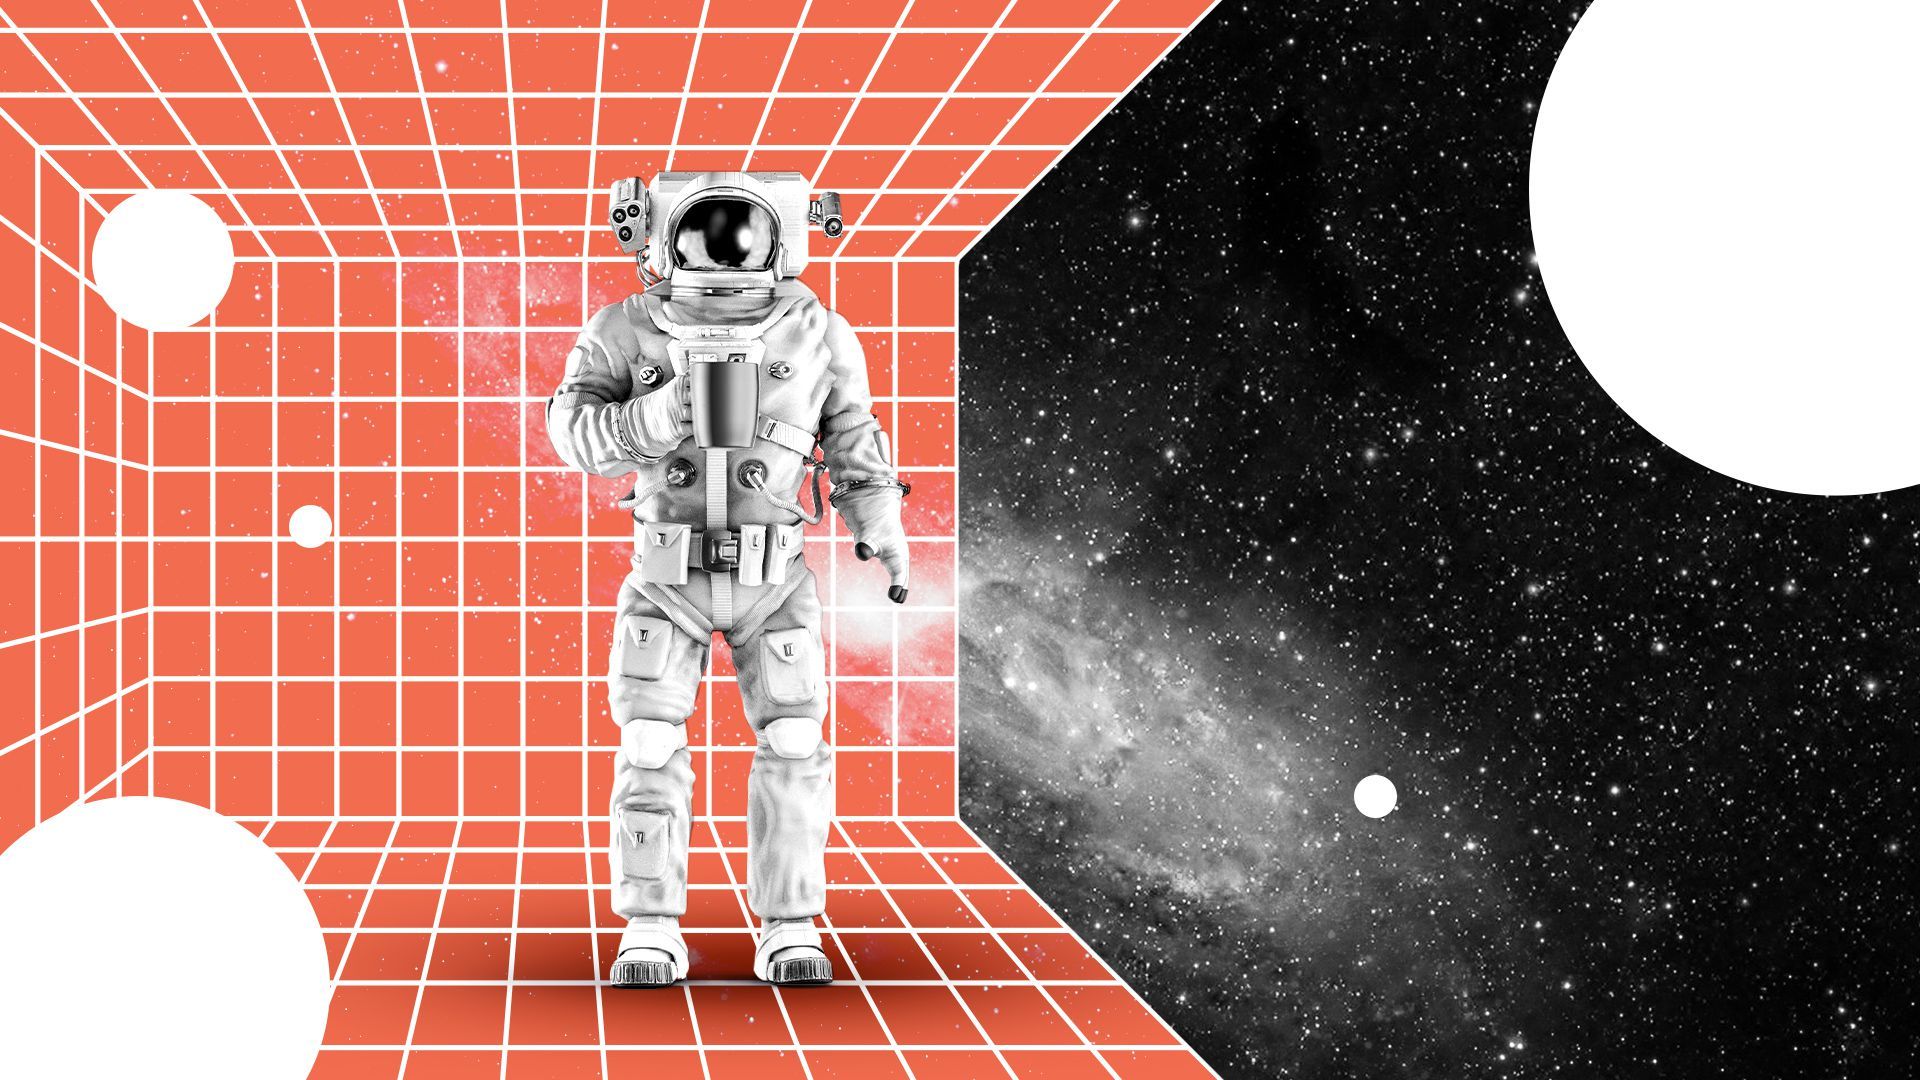 Illustrated collage of an astronaut holding a coffee mug in a gridded vortex in space. 